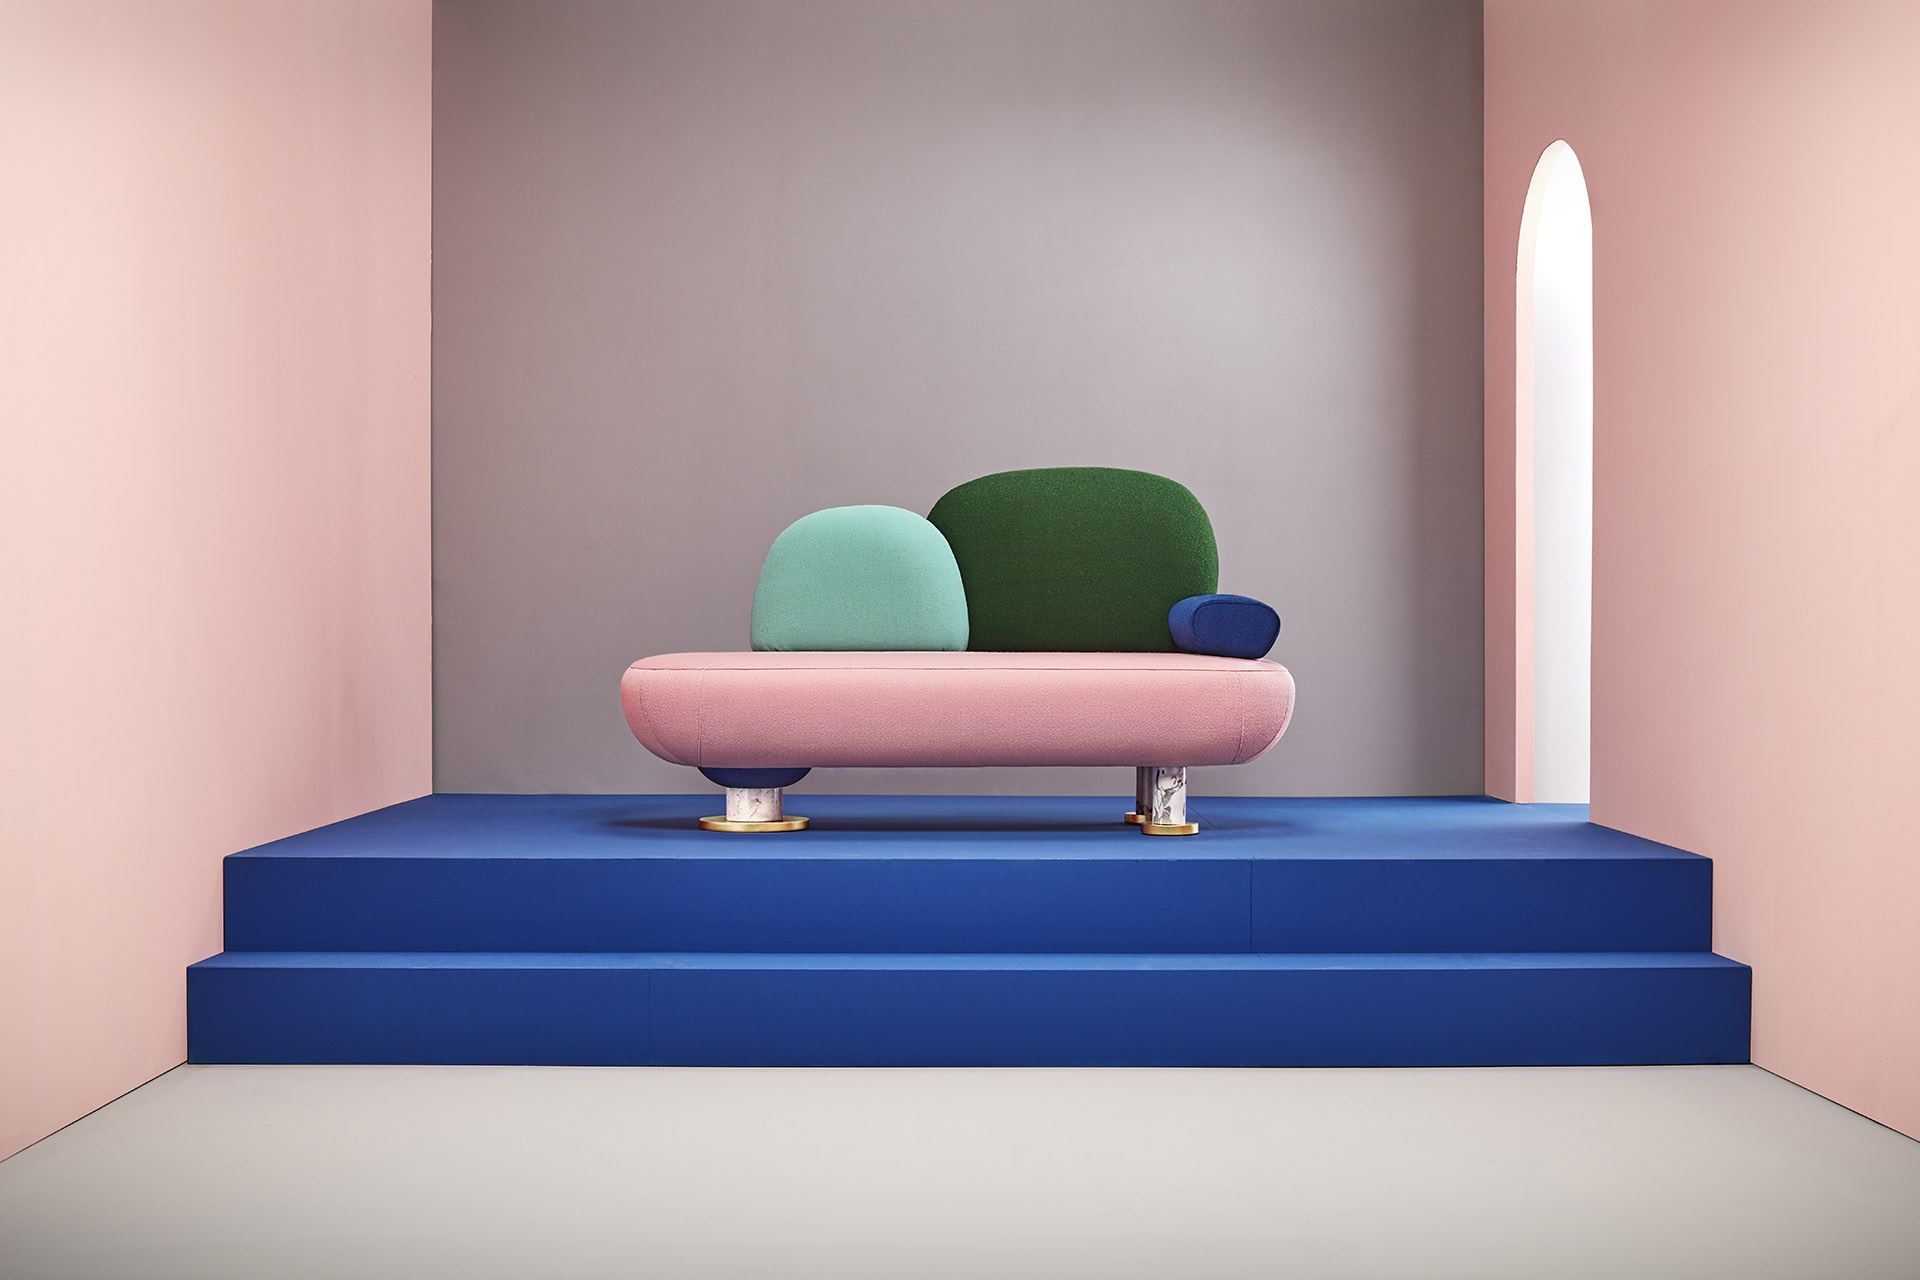 Infinite combinations of Toadstool for an upholstery collection inspired by graphic design